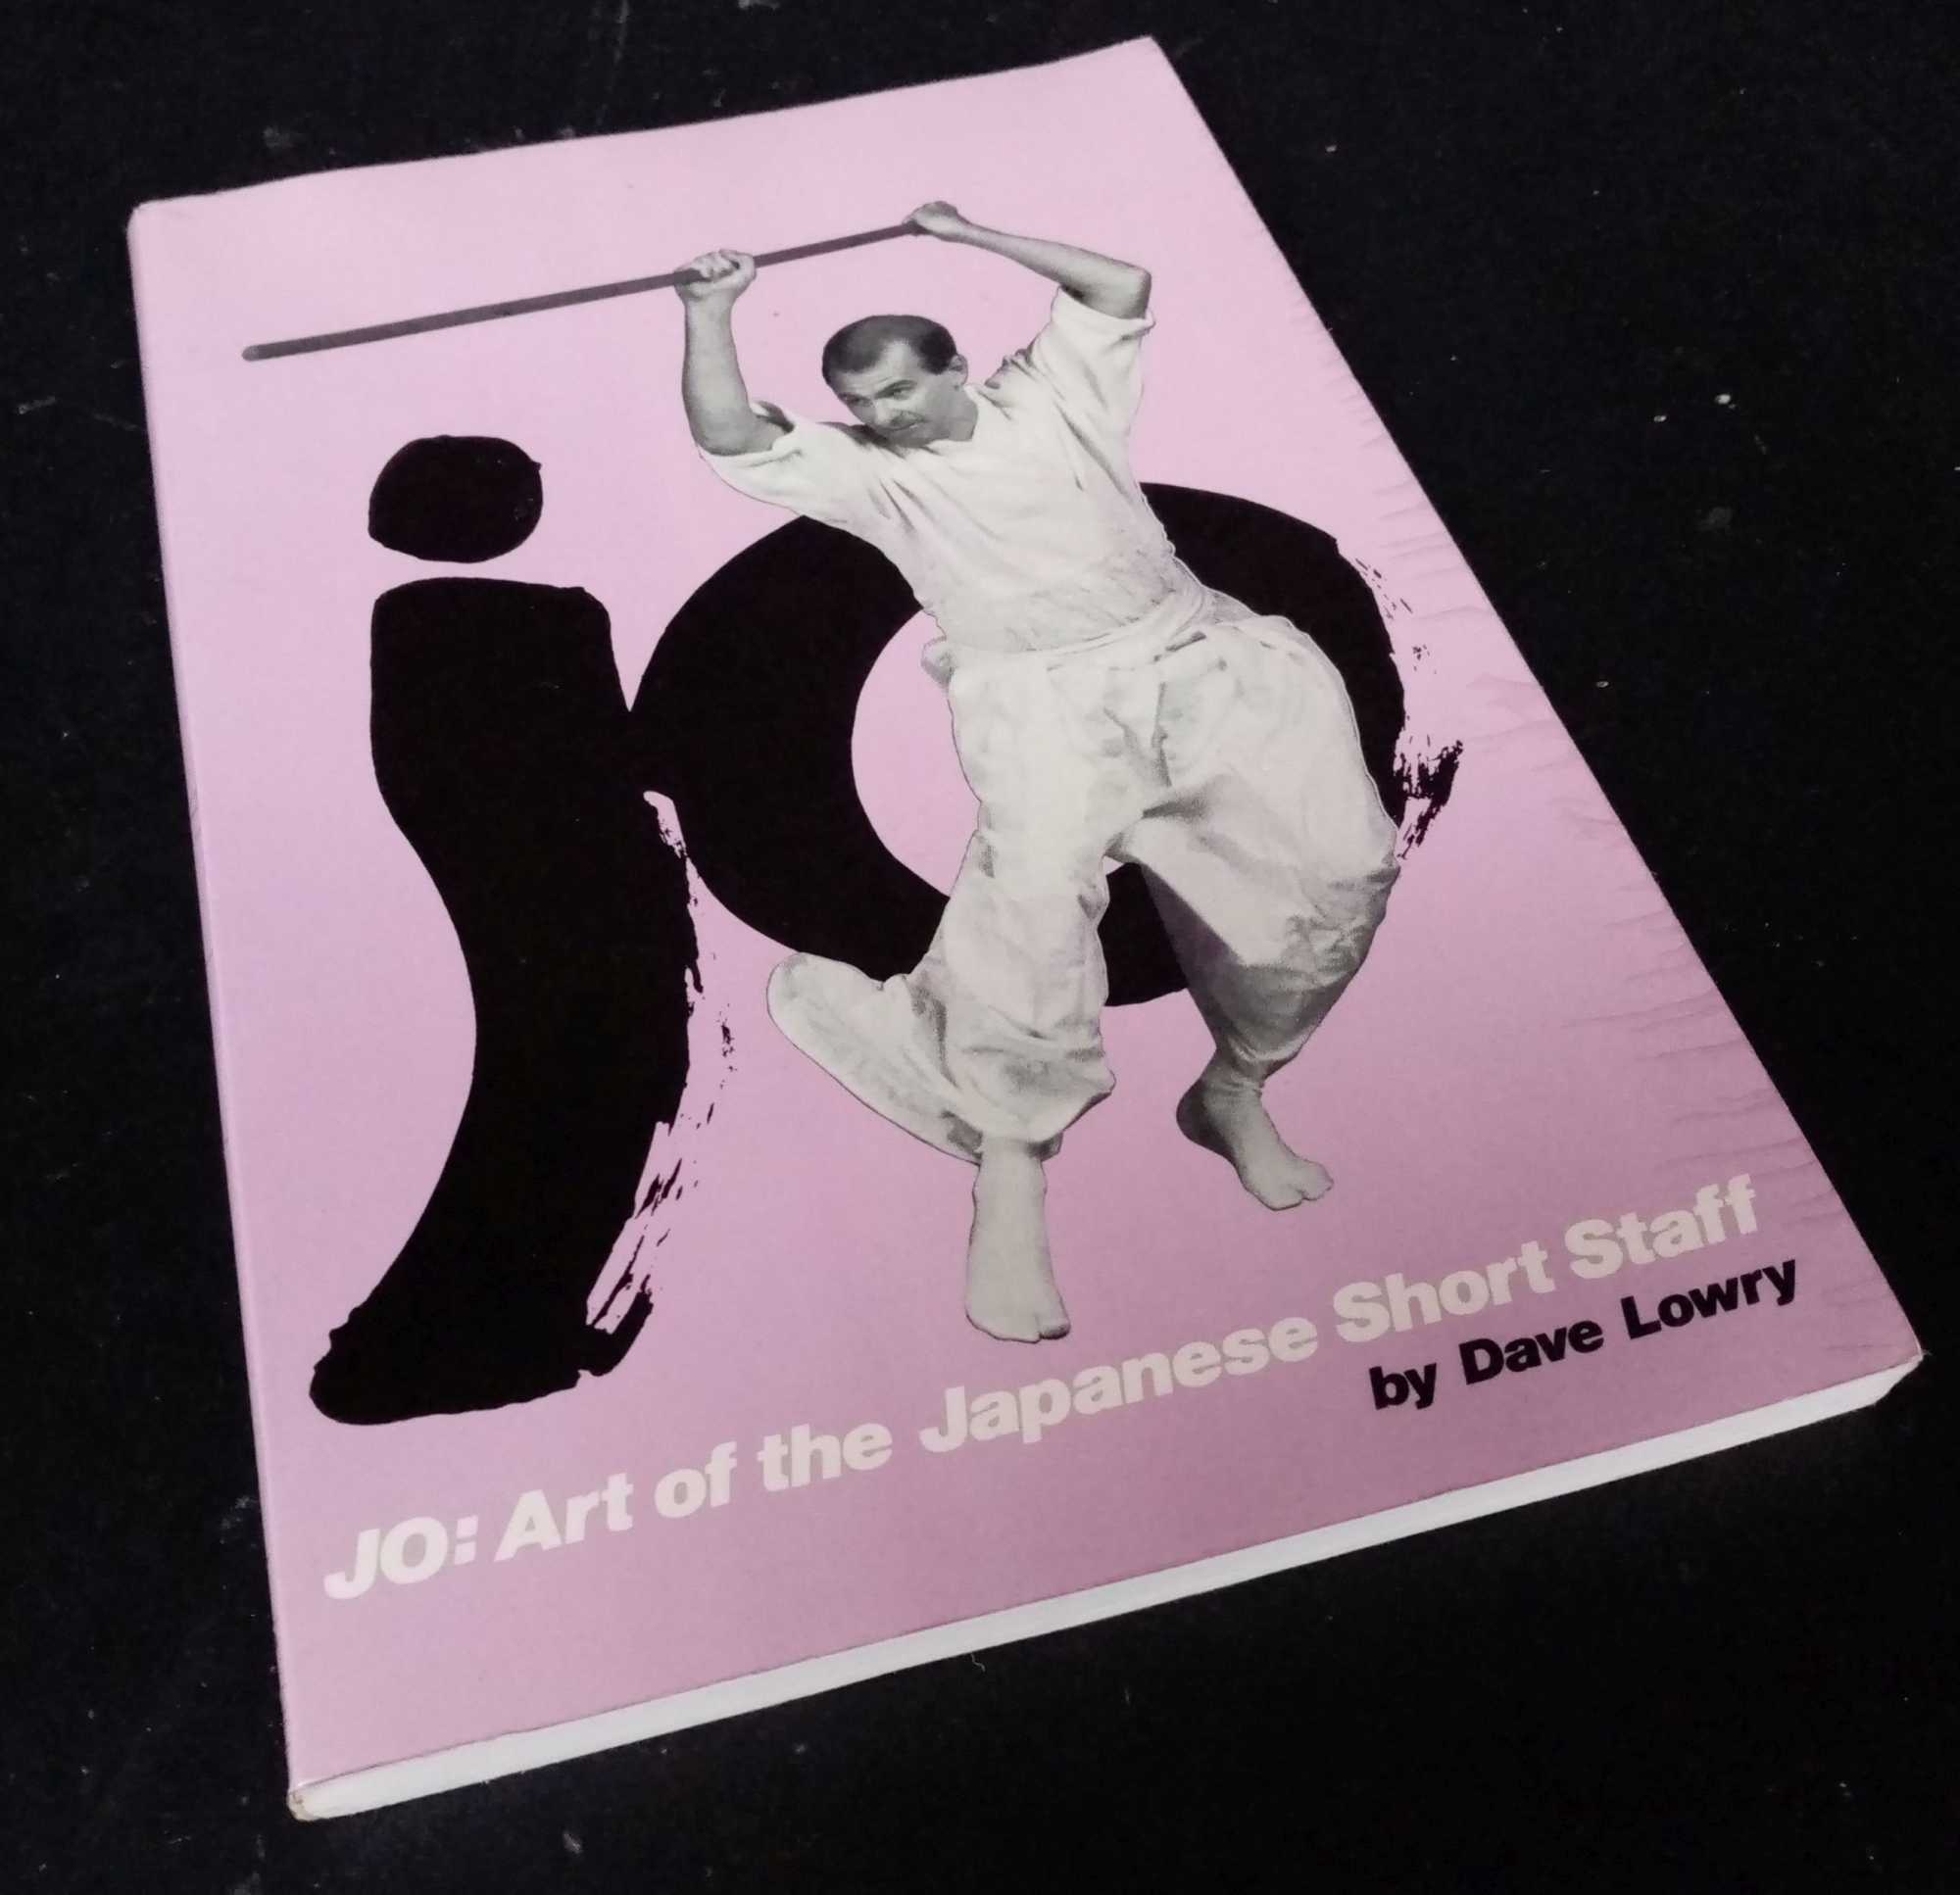 Dave Lowry - Jo: Art of the Japanese Short Staff